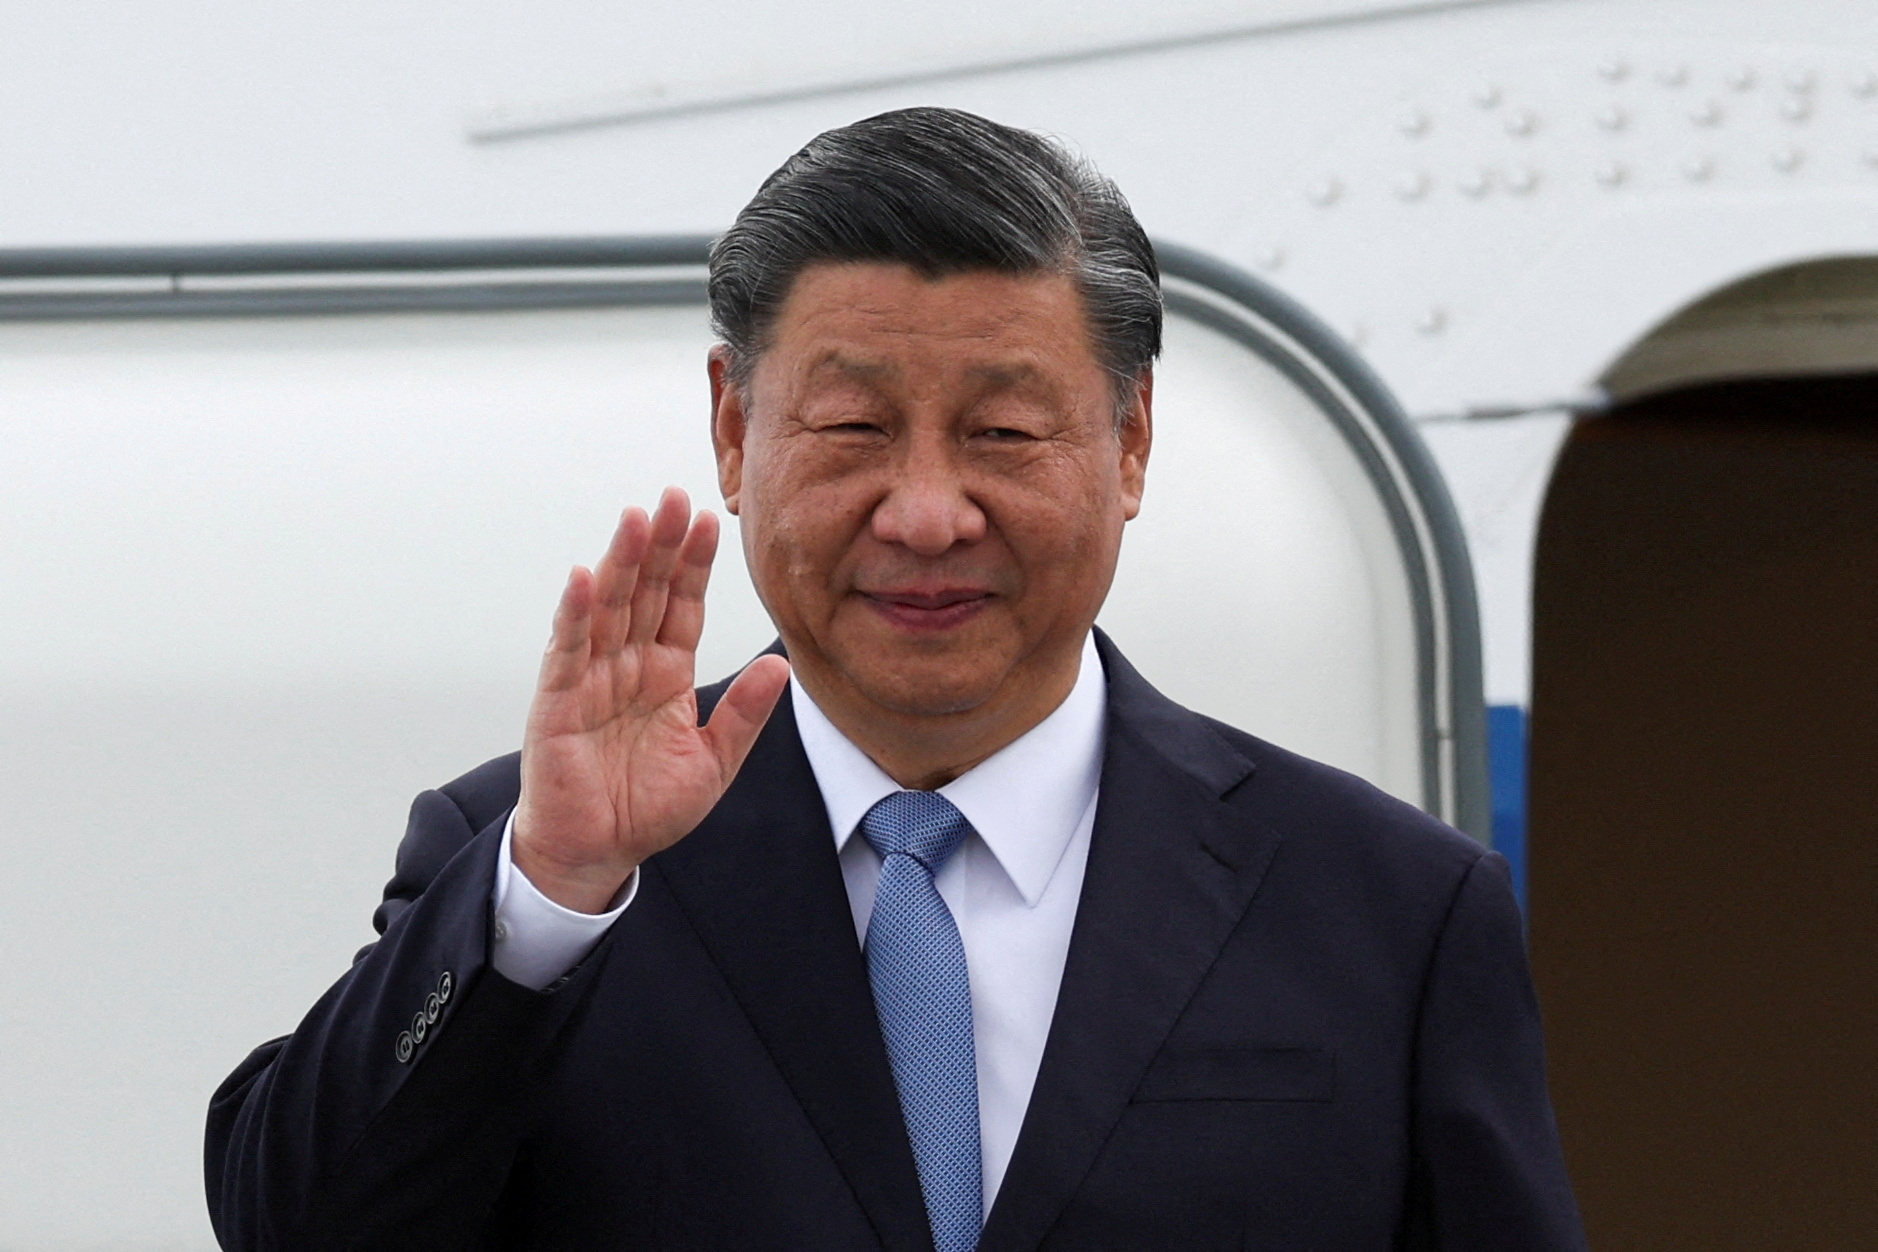 Chinese leader Xi Jinping arrives in San Francisco, where he will attend the APEC summit. Photo: Reuters